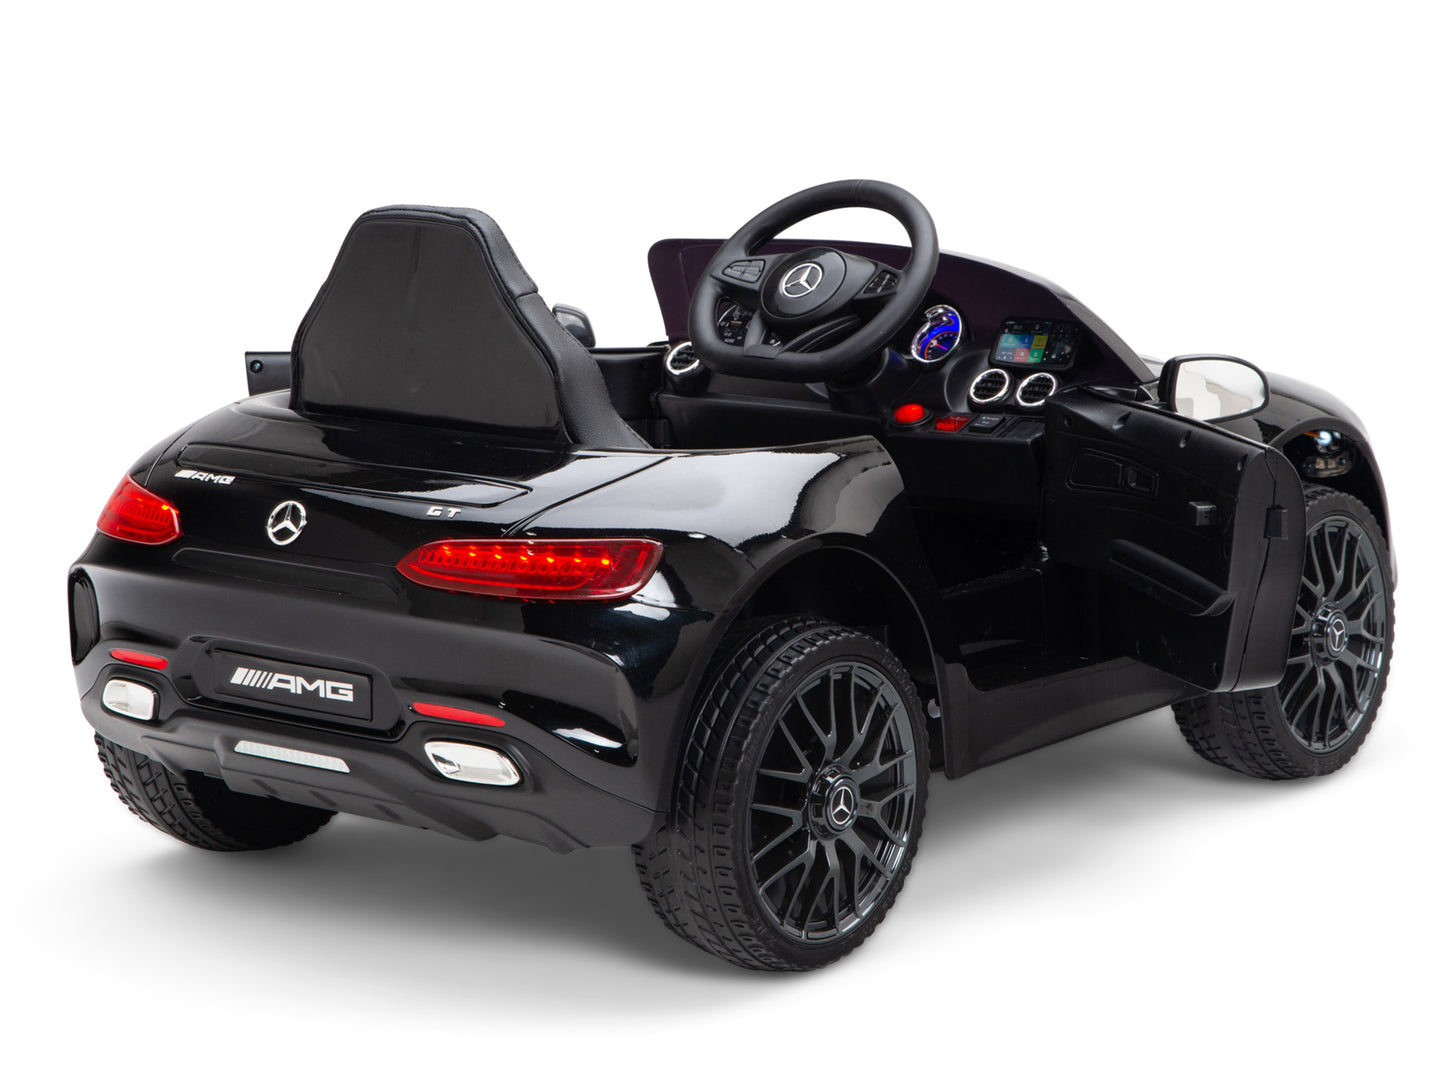 Mercedes-AMG GT Coupe 12V Battery Operated Ride On Car with Remote Control - Black